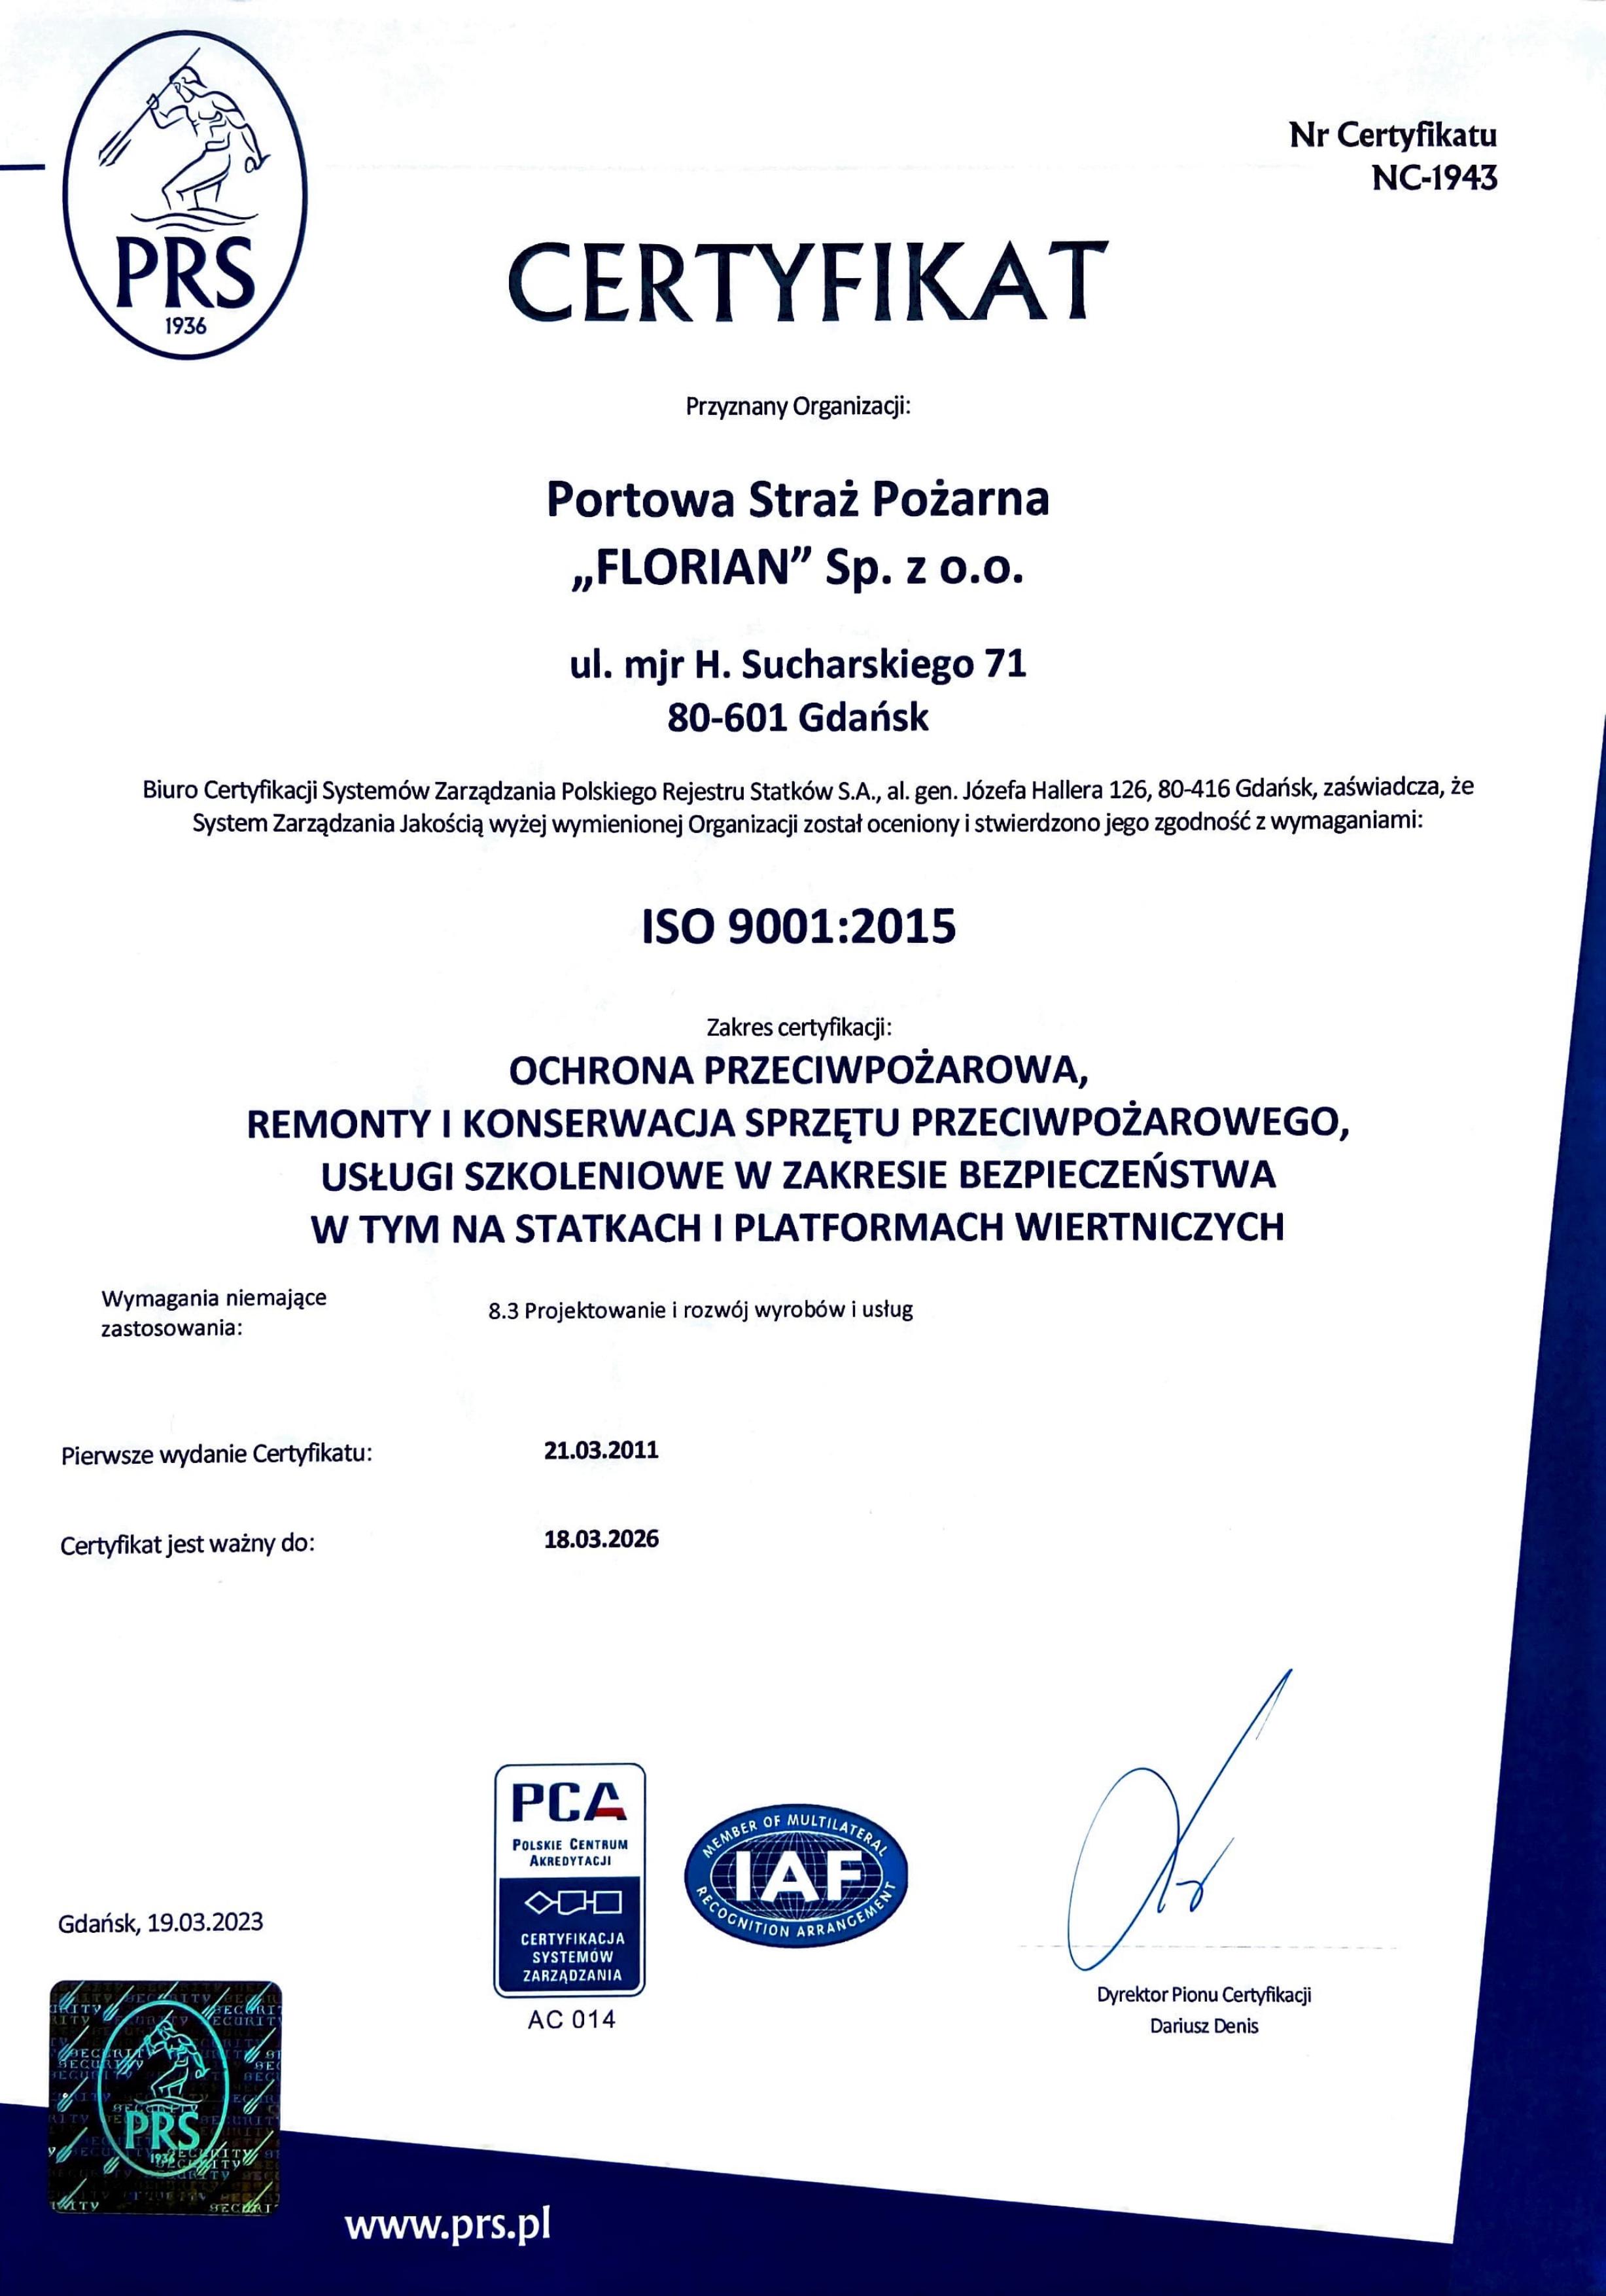 ISO 9001 FOR HFS FLORIAN